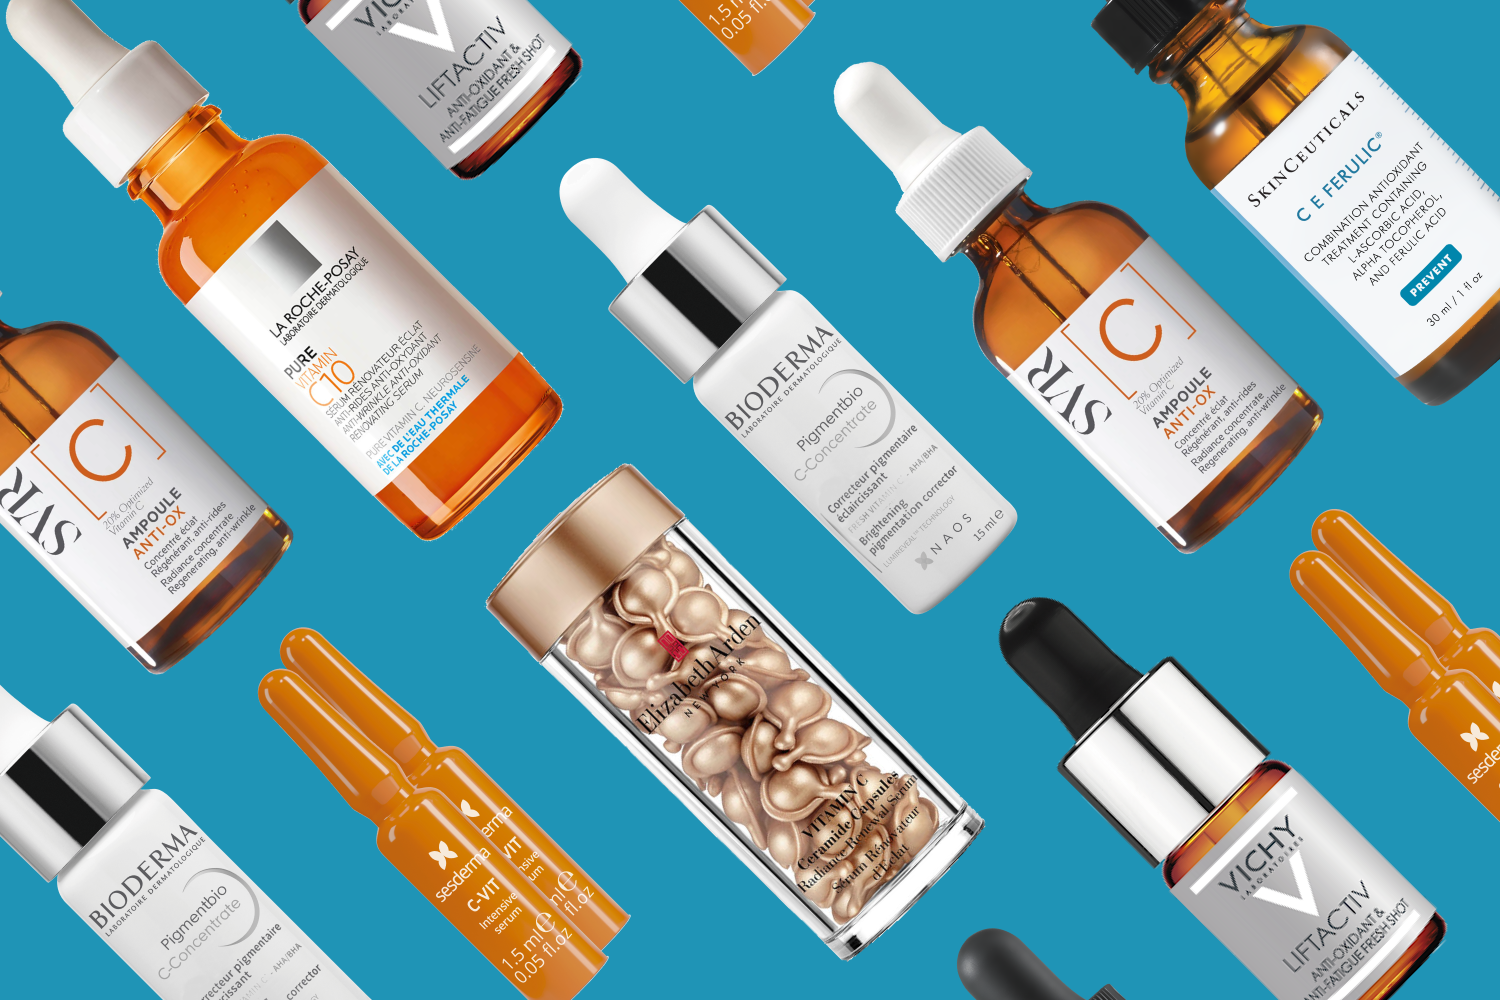 Look No Further, Here’s the Best Vitamin C Serum for Your Skin